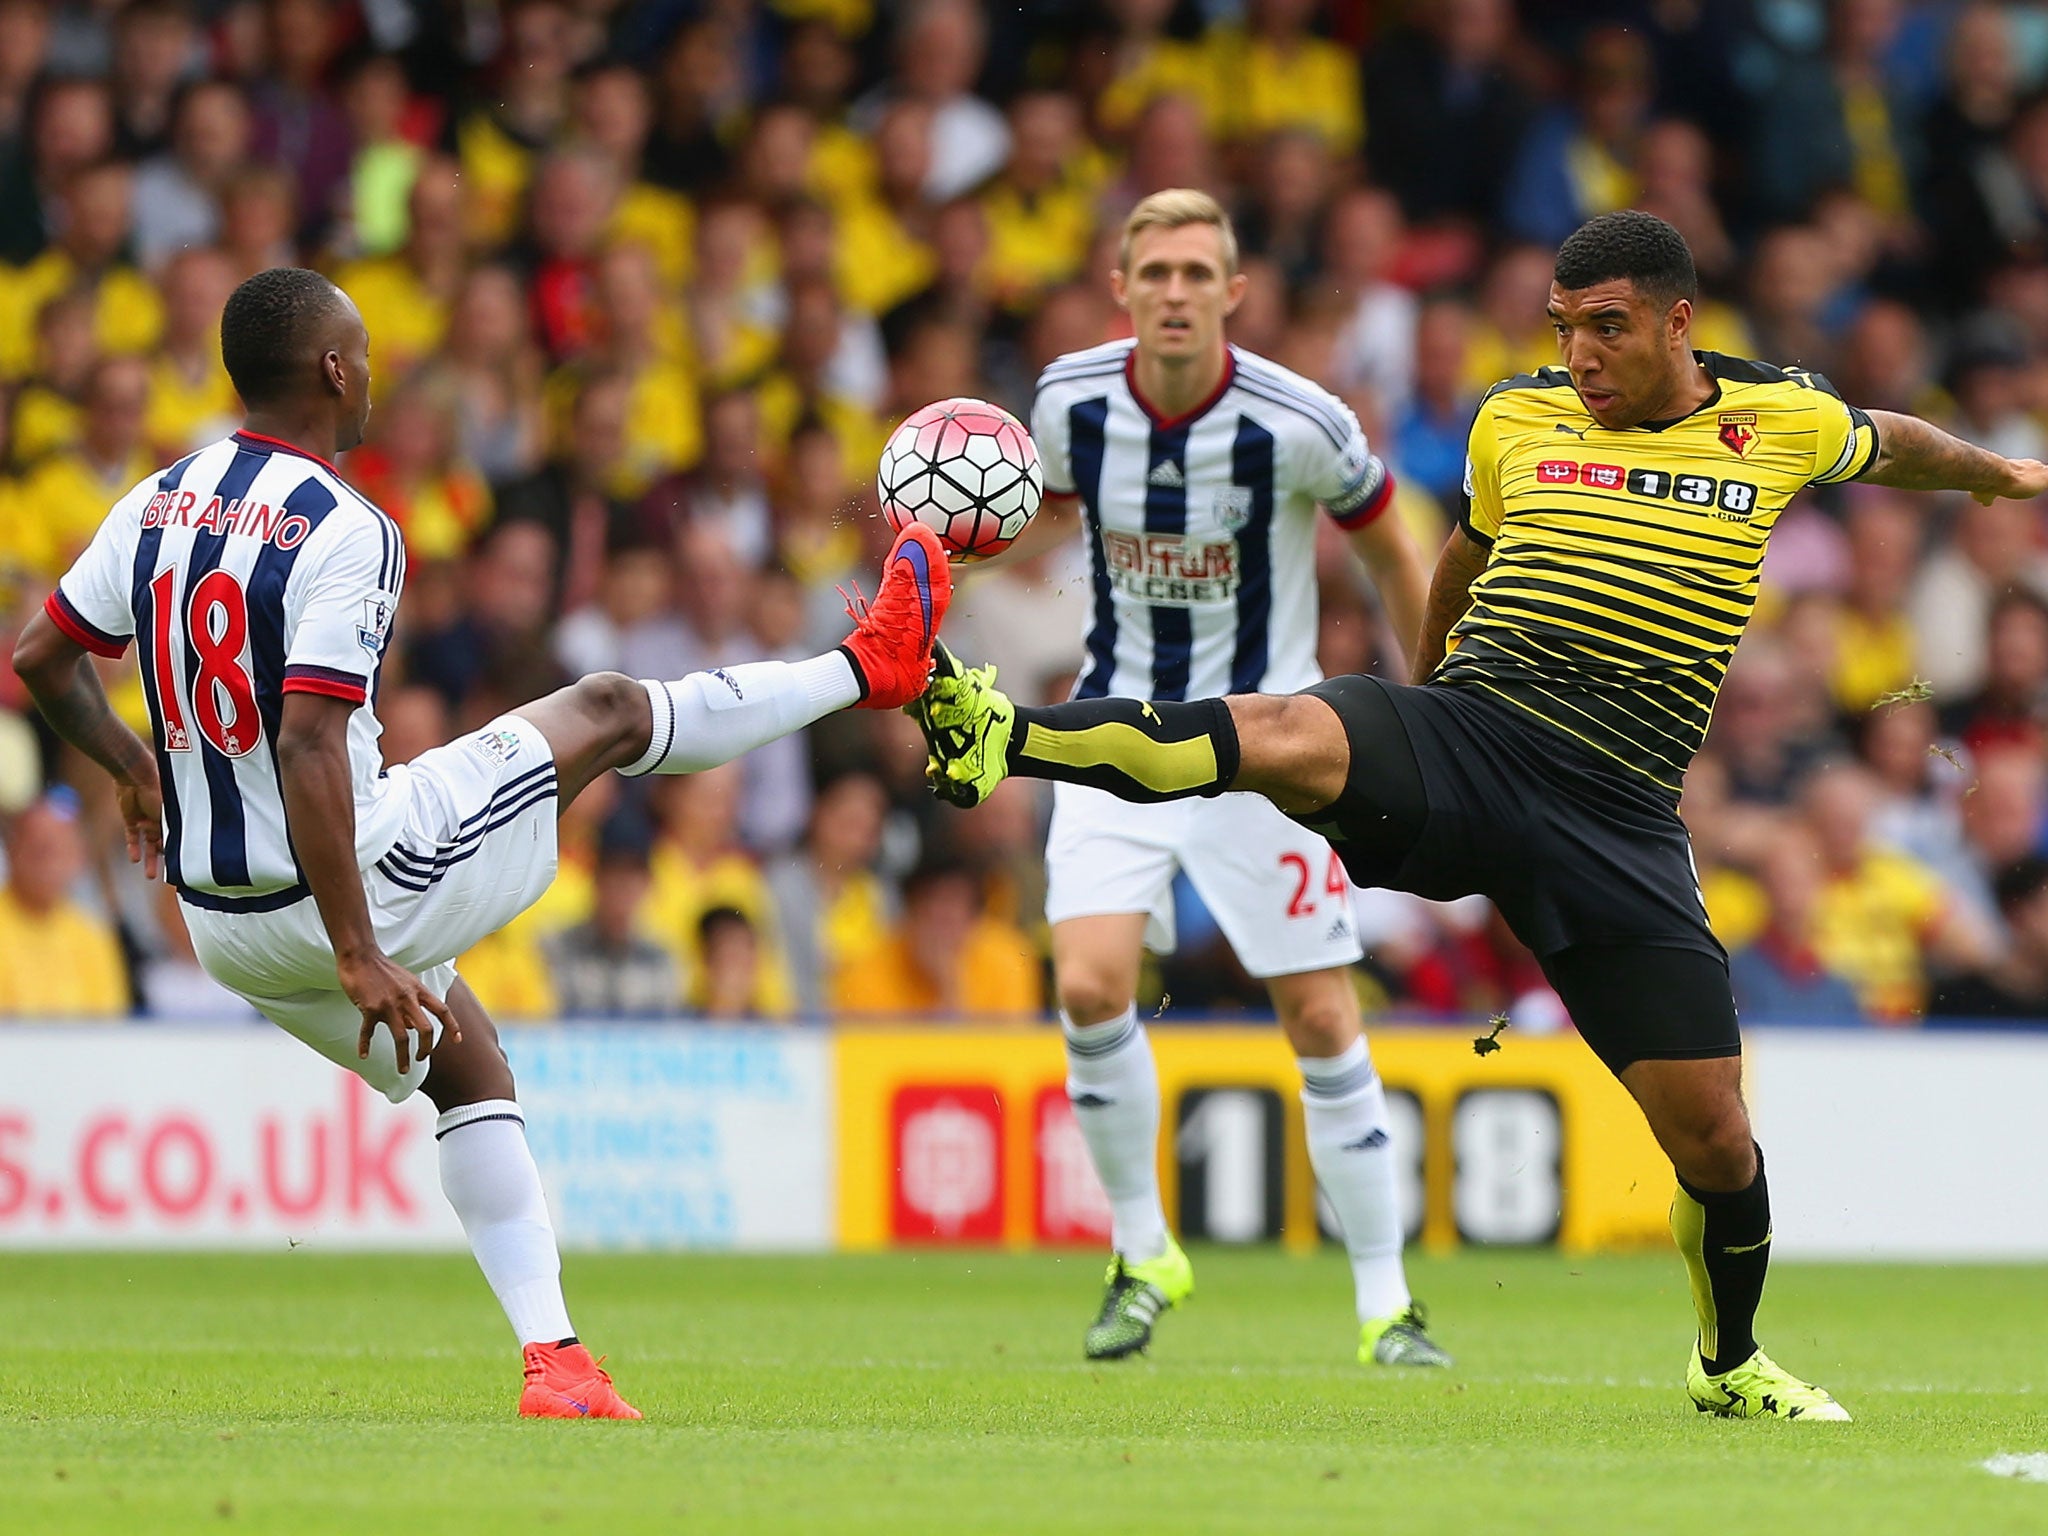 Troy Deeney challenges Saido Berahino during Watford's clash with West Brom